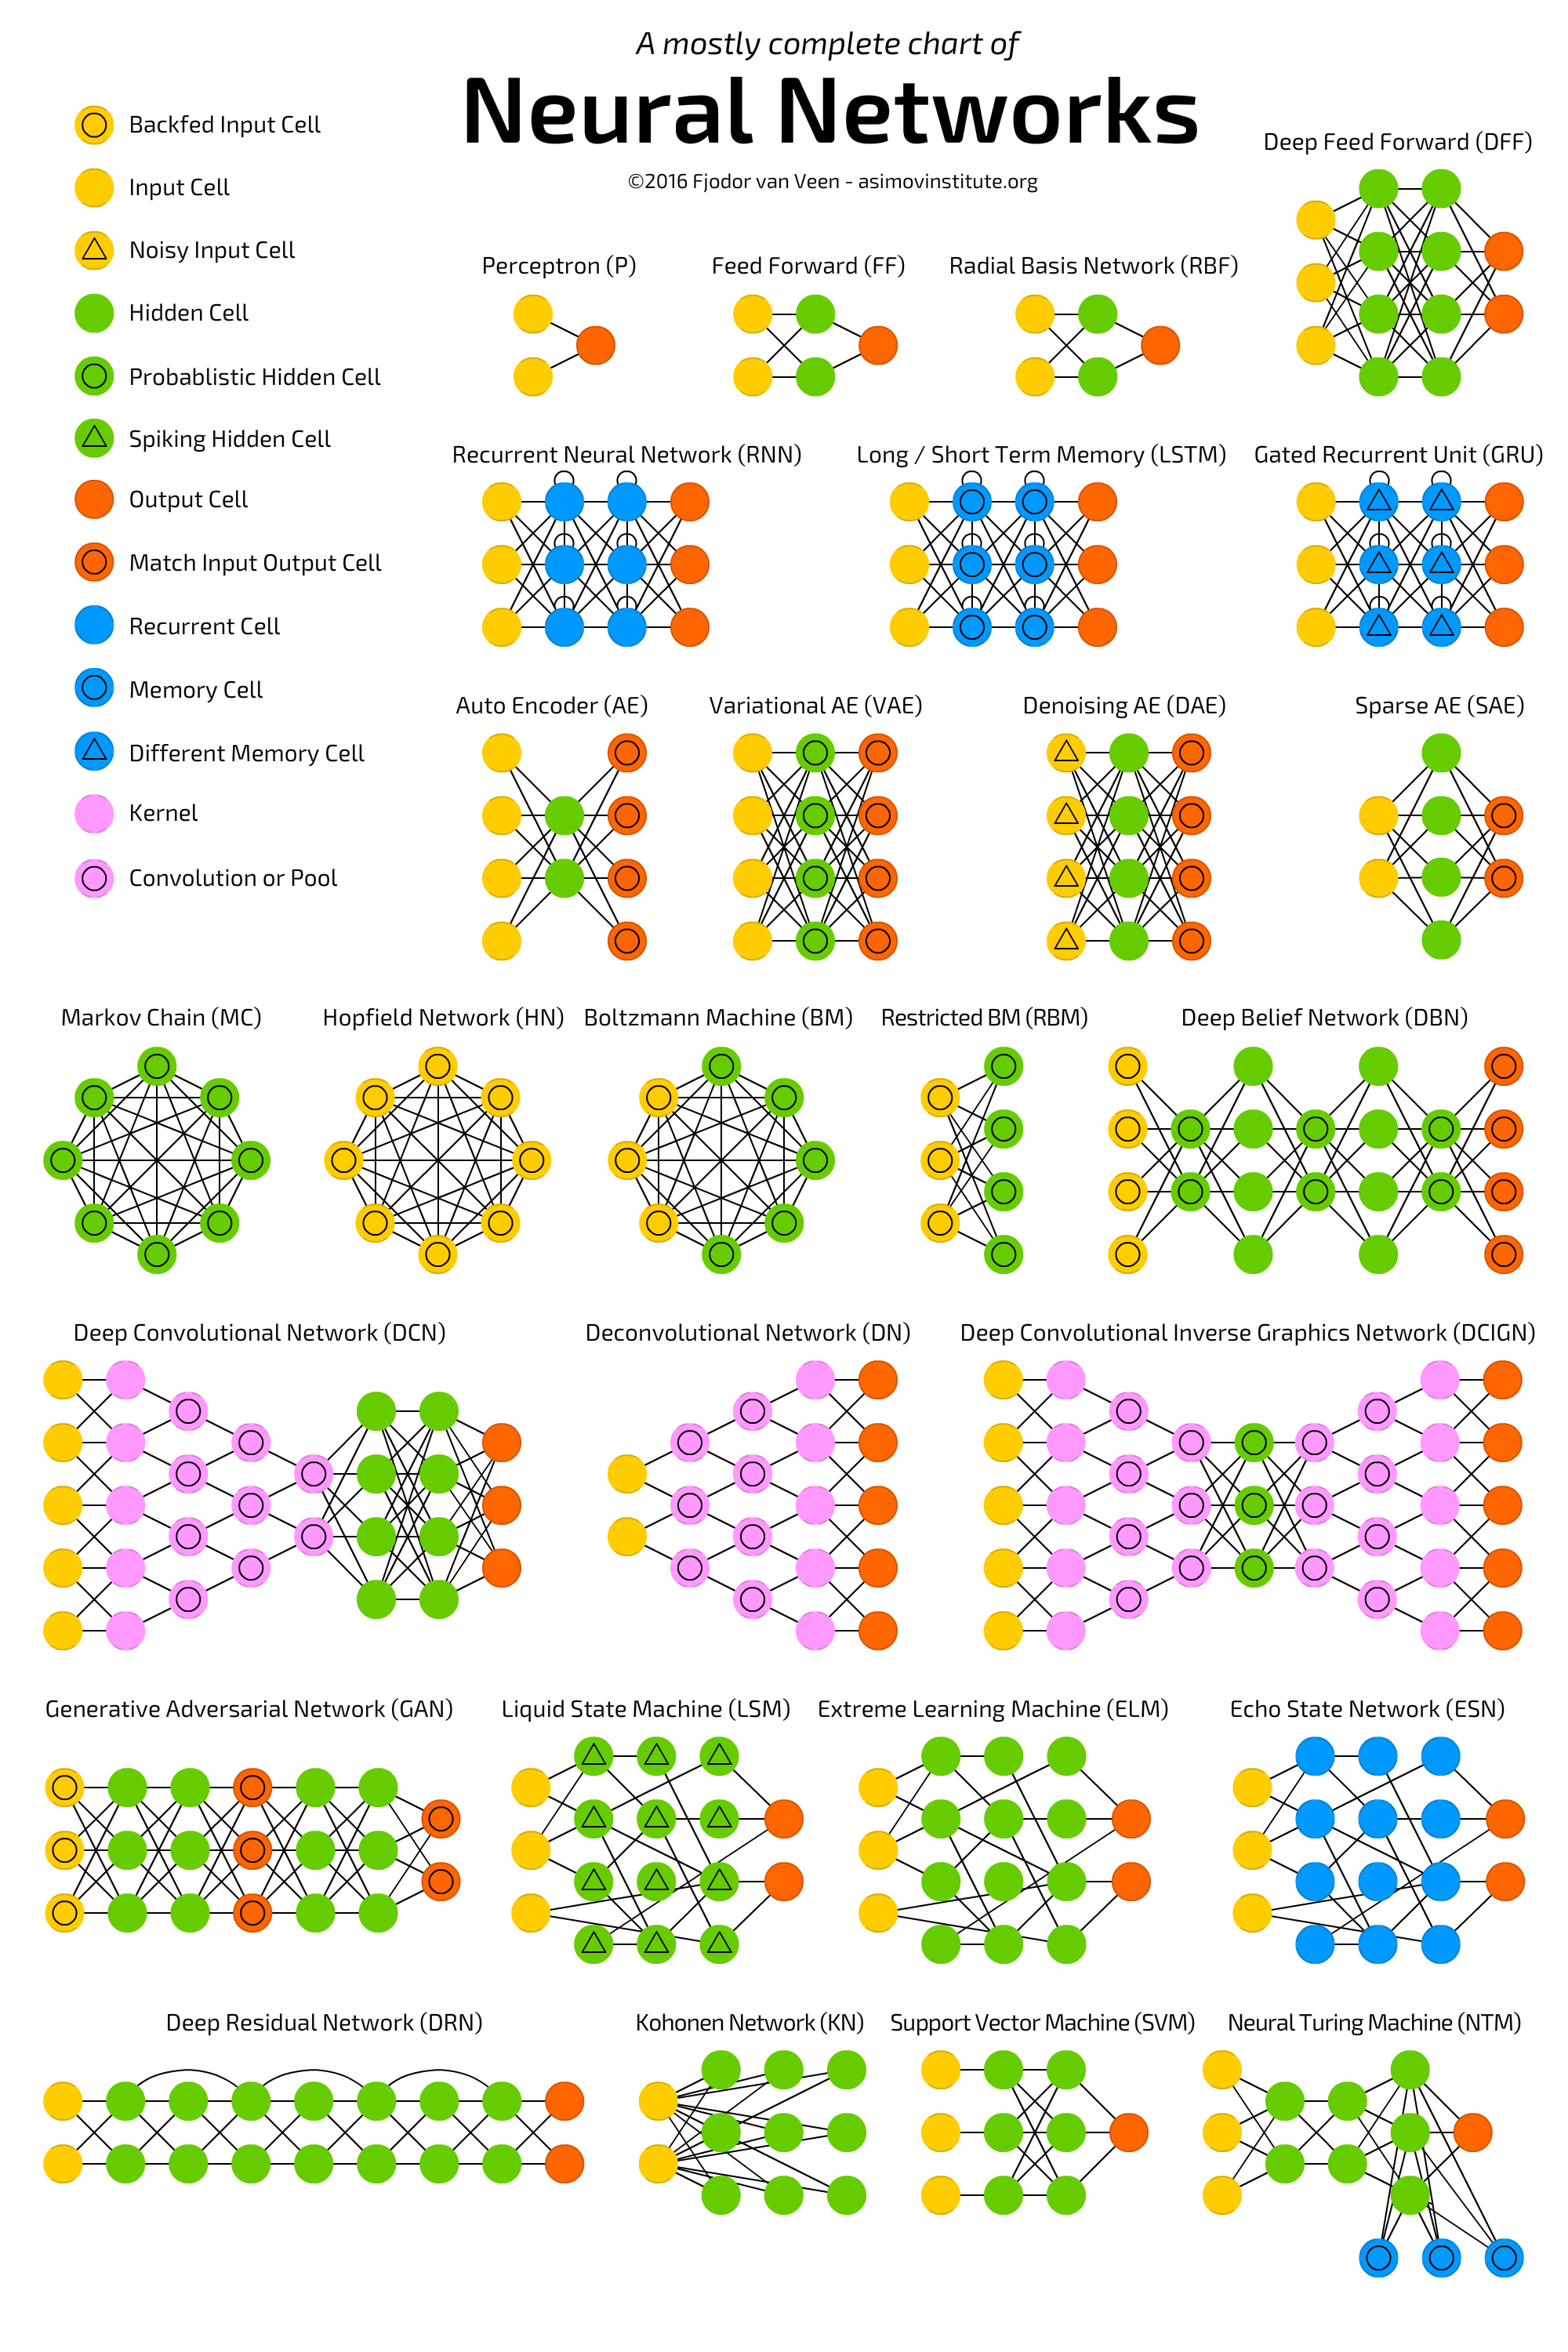 Neural Networks Zoo